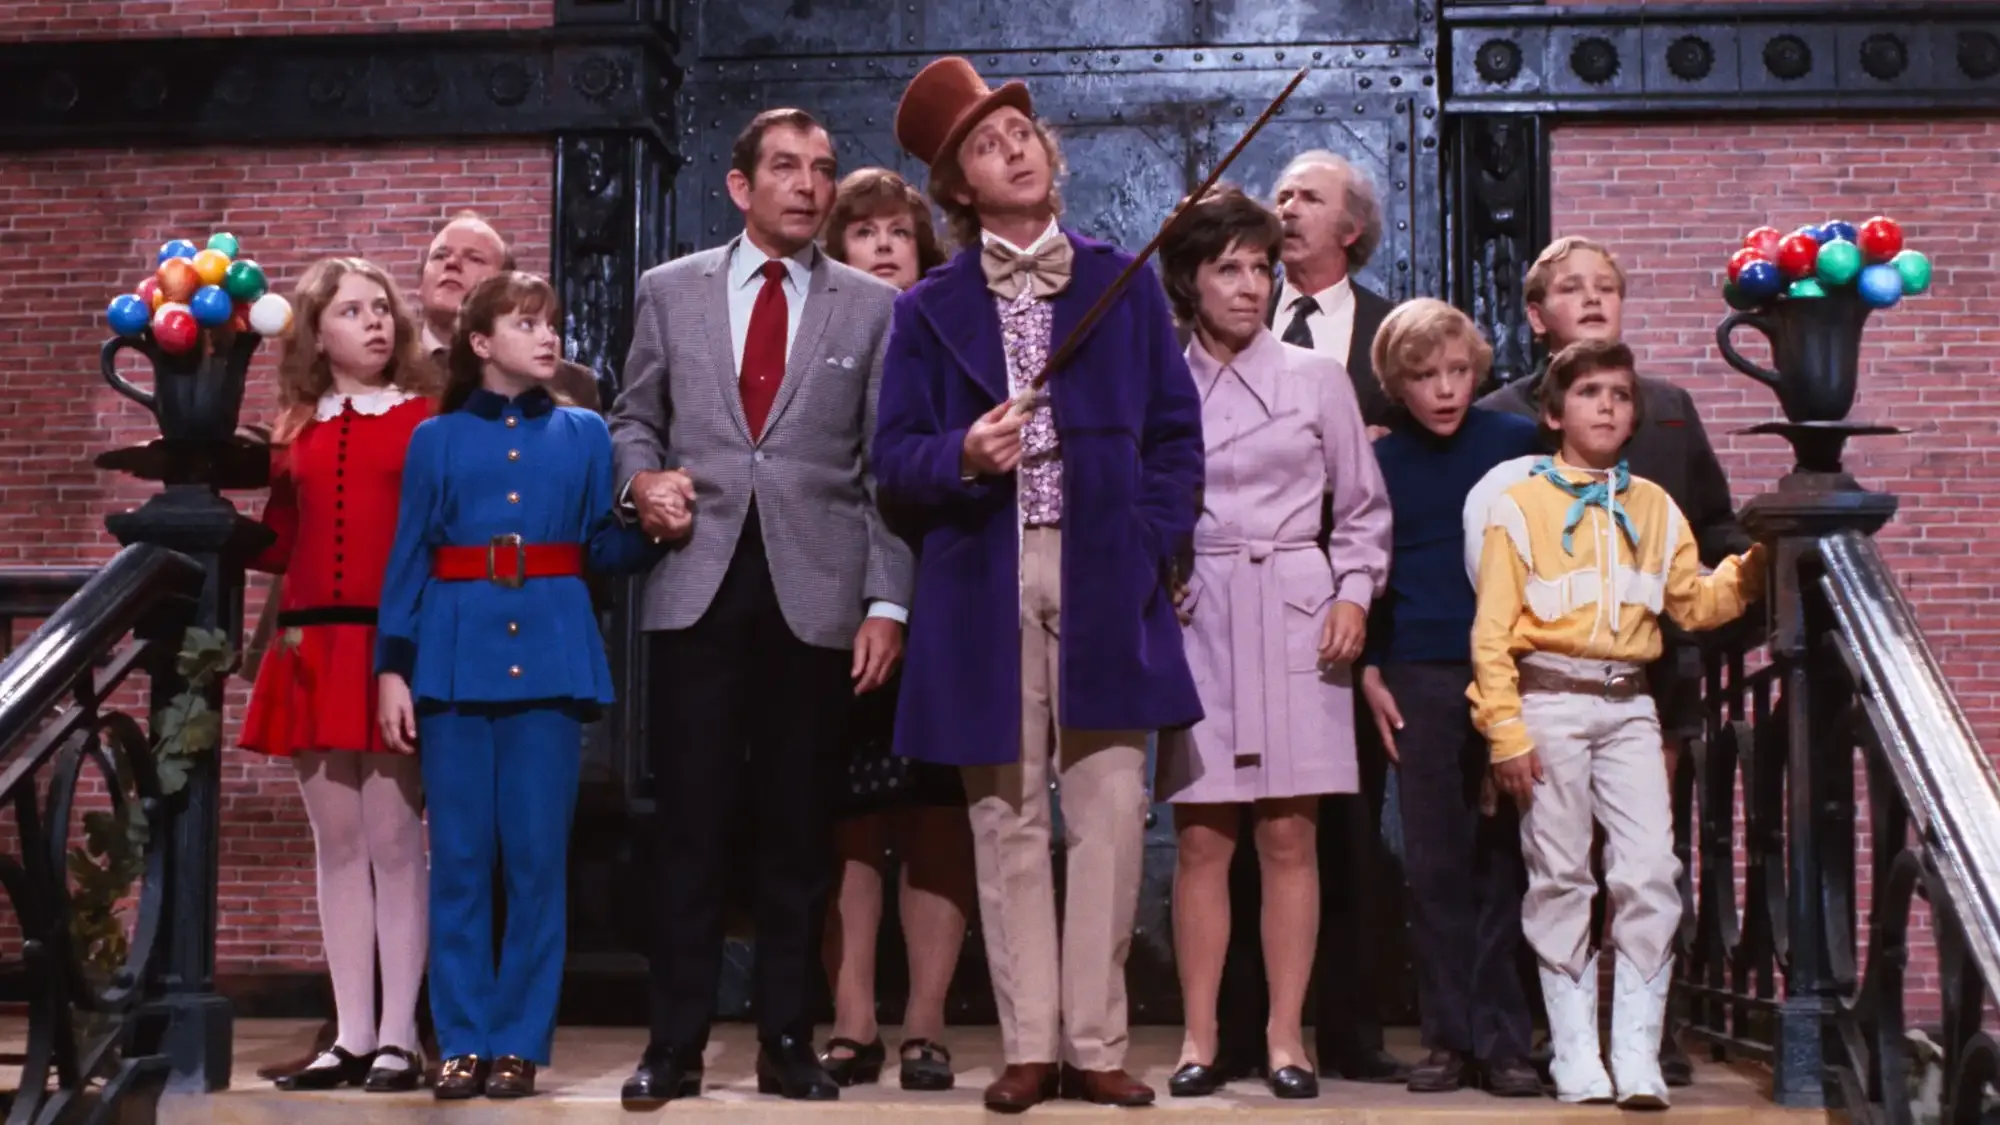 Willy Wonka & the Chocolate Factory movie review